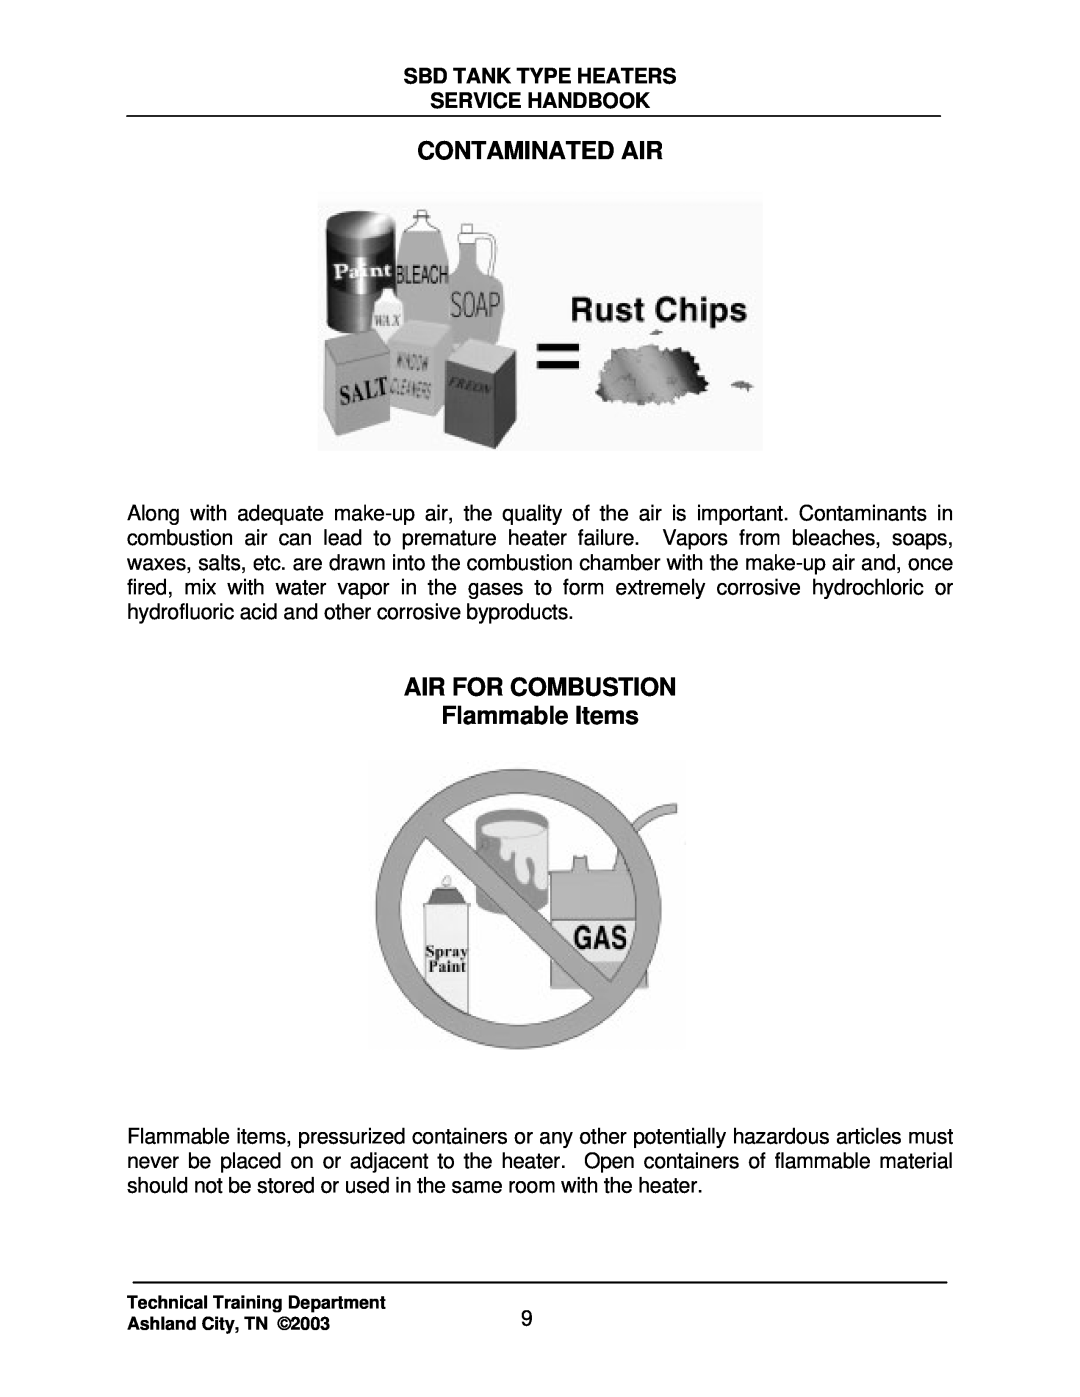 State Industries SBD85 500 Contaminated Air, AIR FOR COMBUSTION Flammable Items, Sbd Tank Type Heaters Service Handbook 